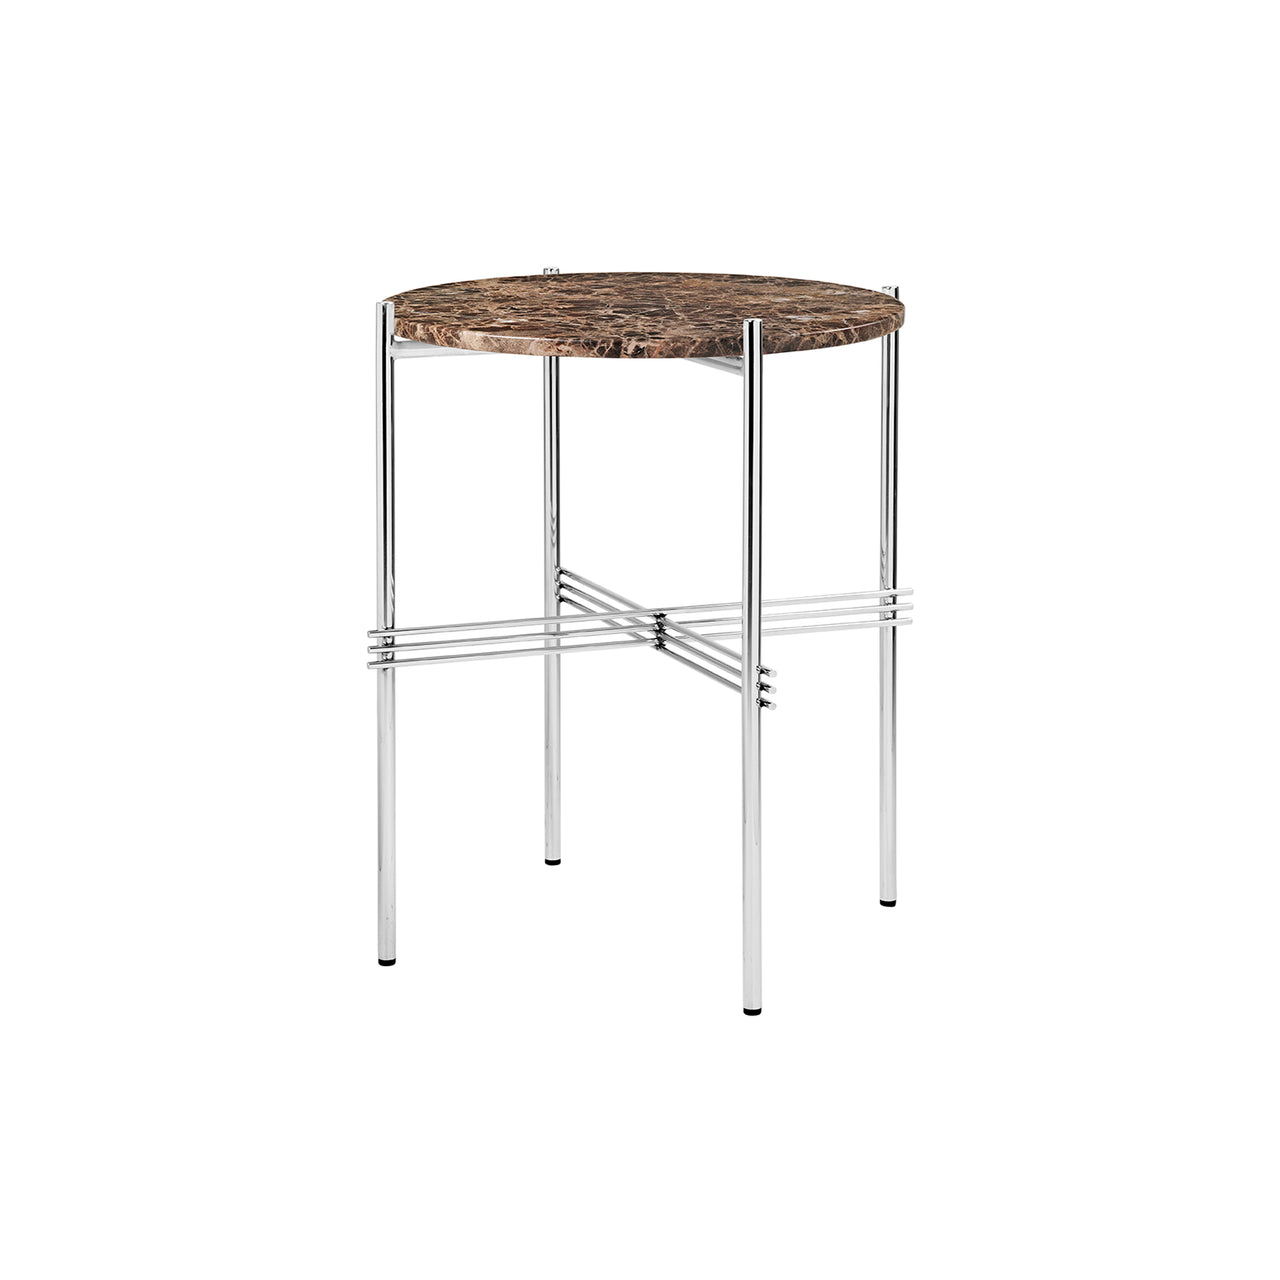 TS Round Side Table: Polished Steel + Brown Emperador Marble